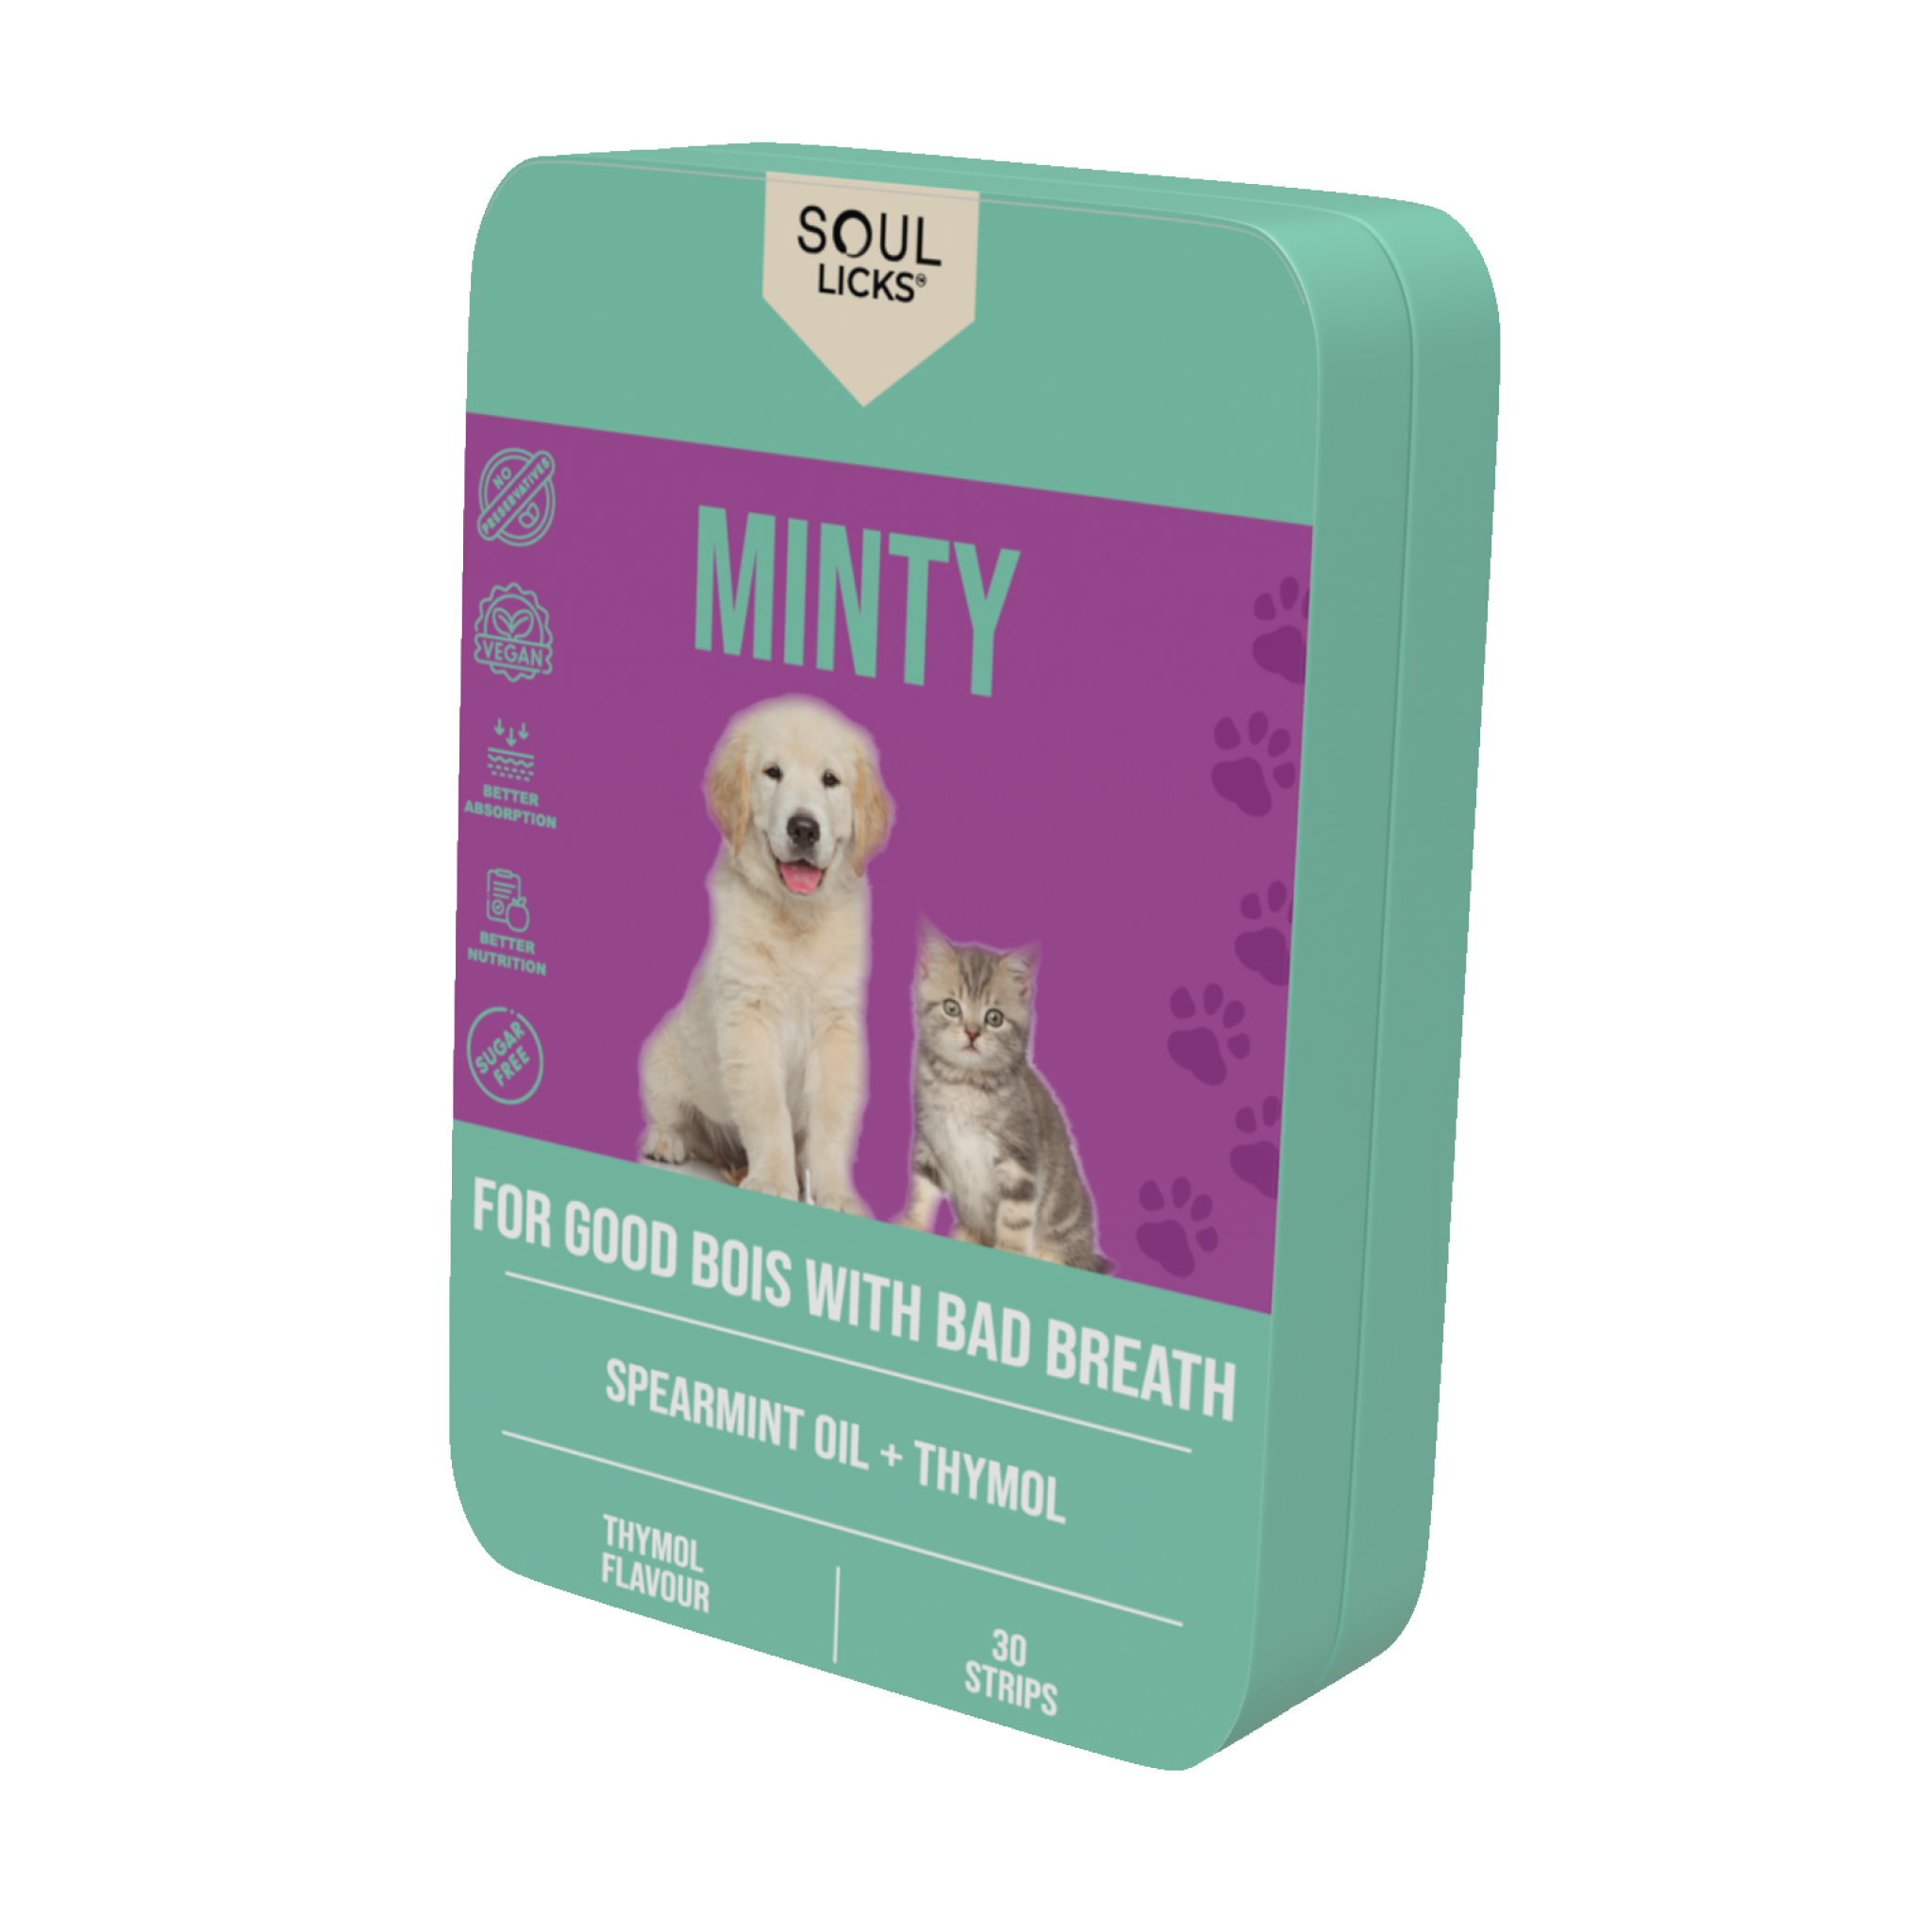 Minty - Freedom from bad breath